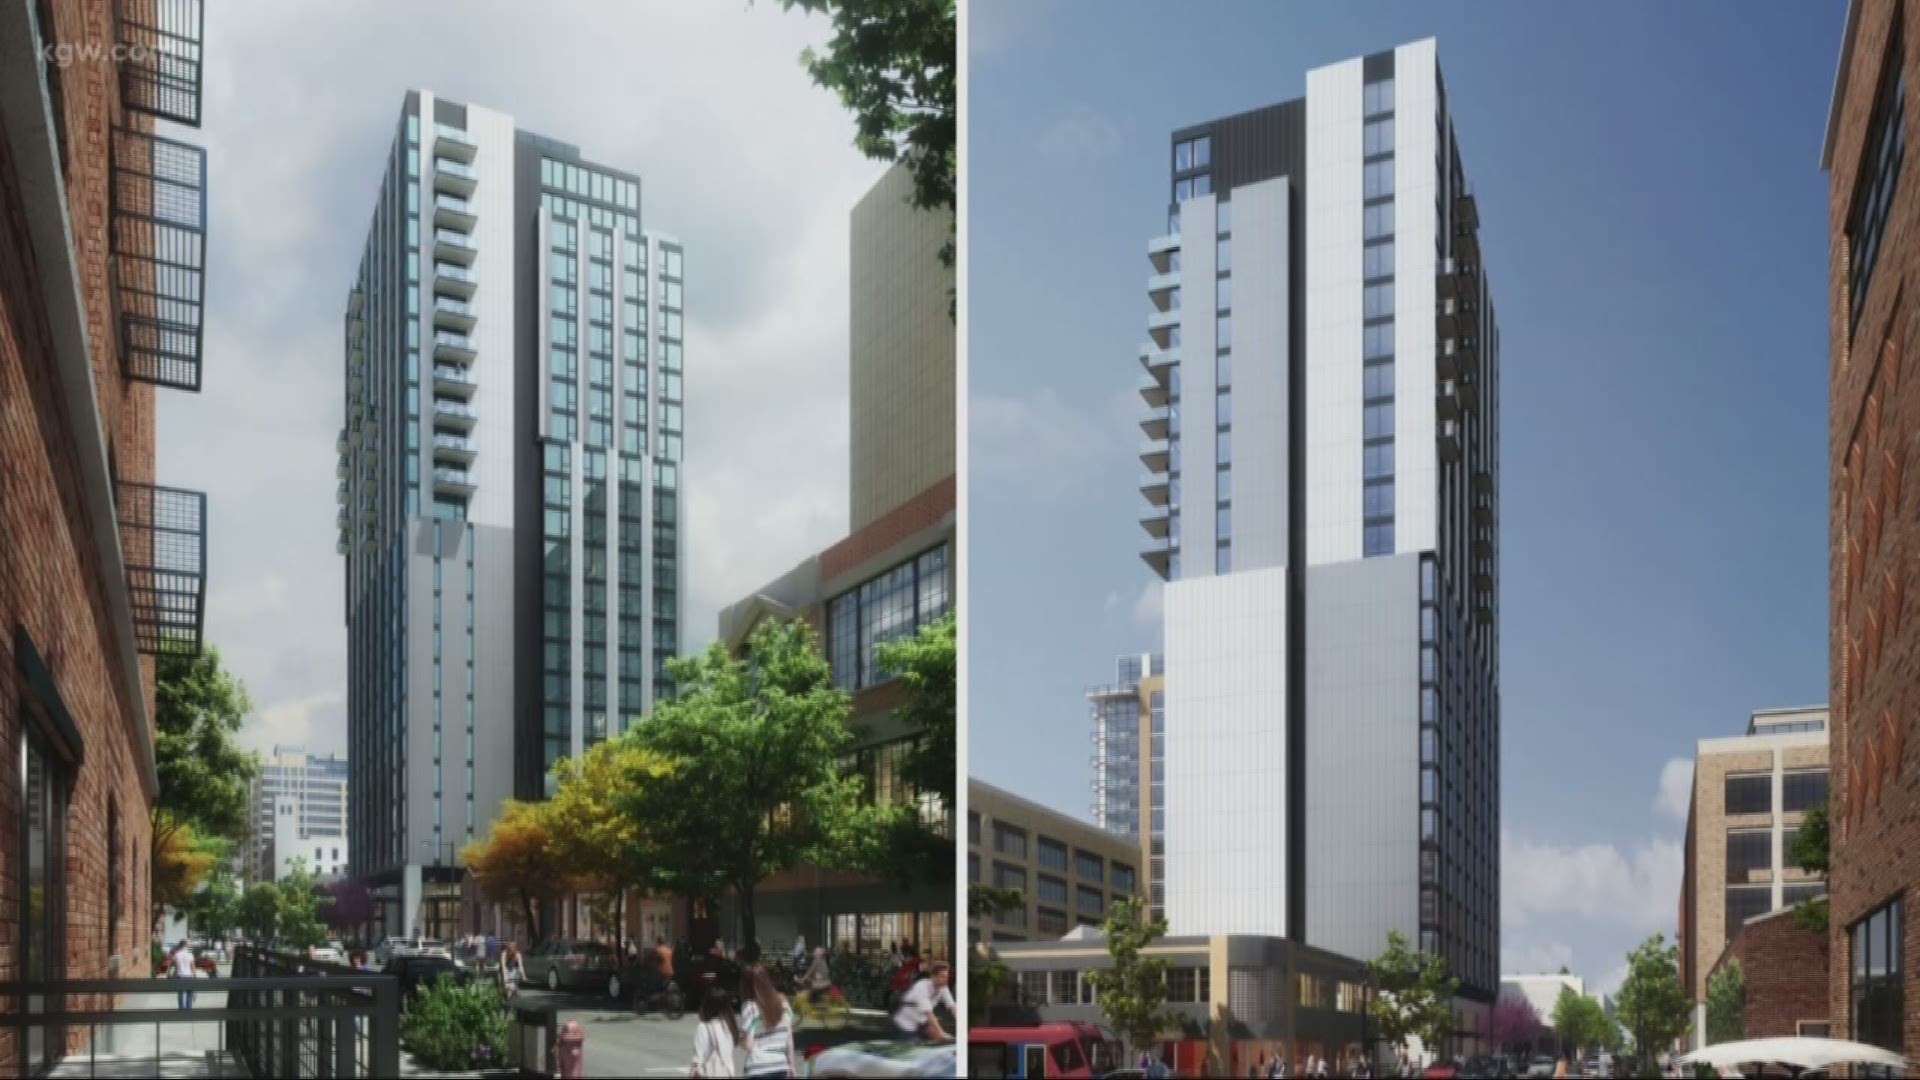 Why neighbors in the Pearl District are opposing a new high rise plan.